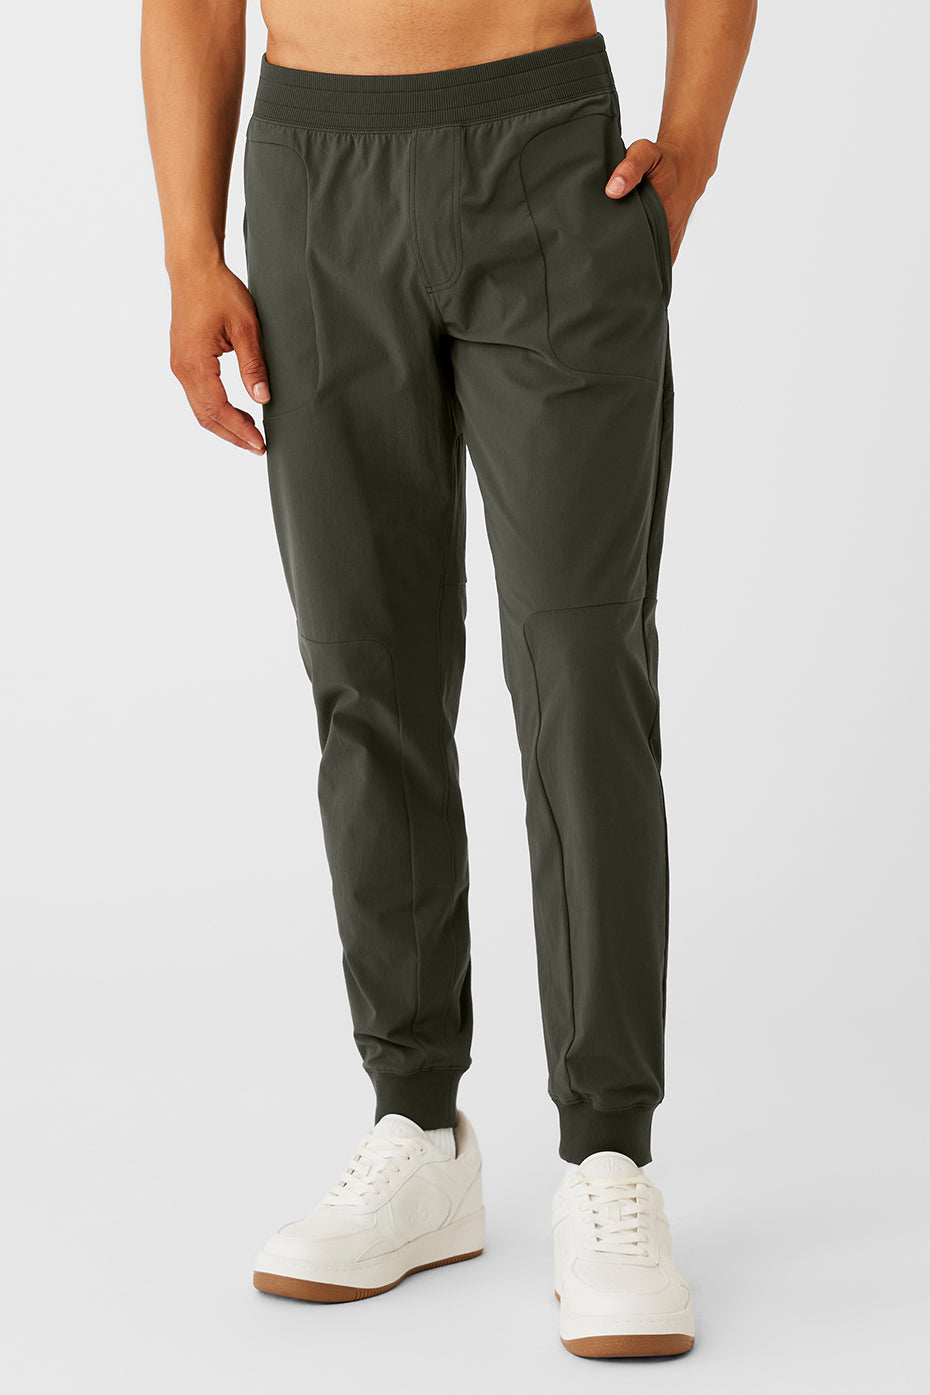 Co-Op Pant - Stealth Green